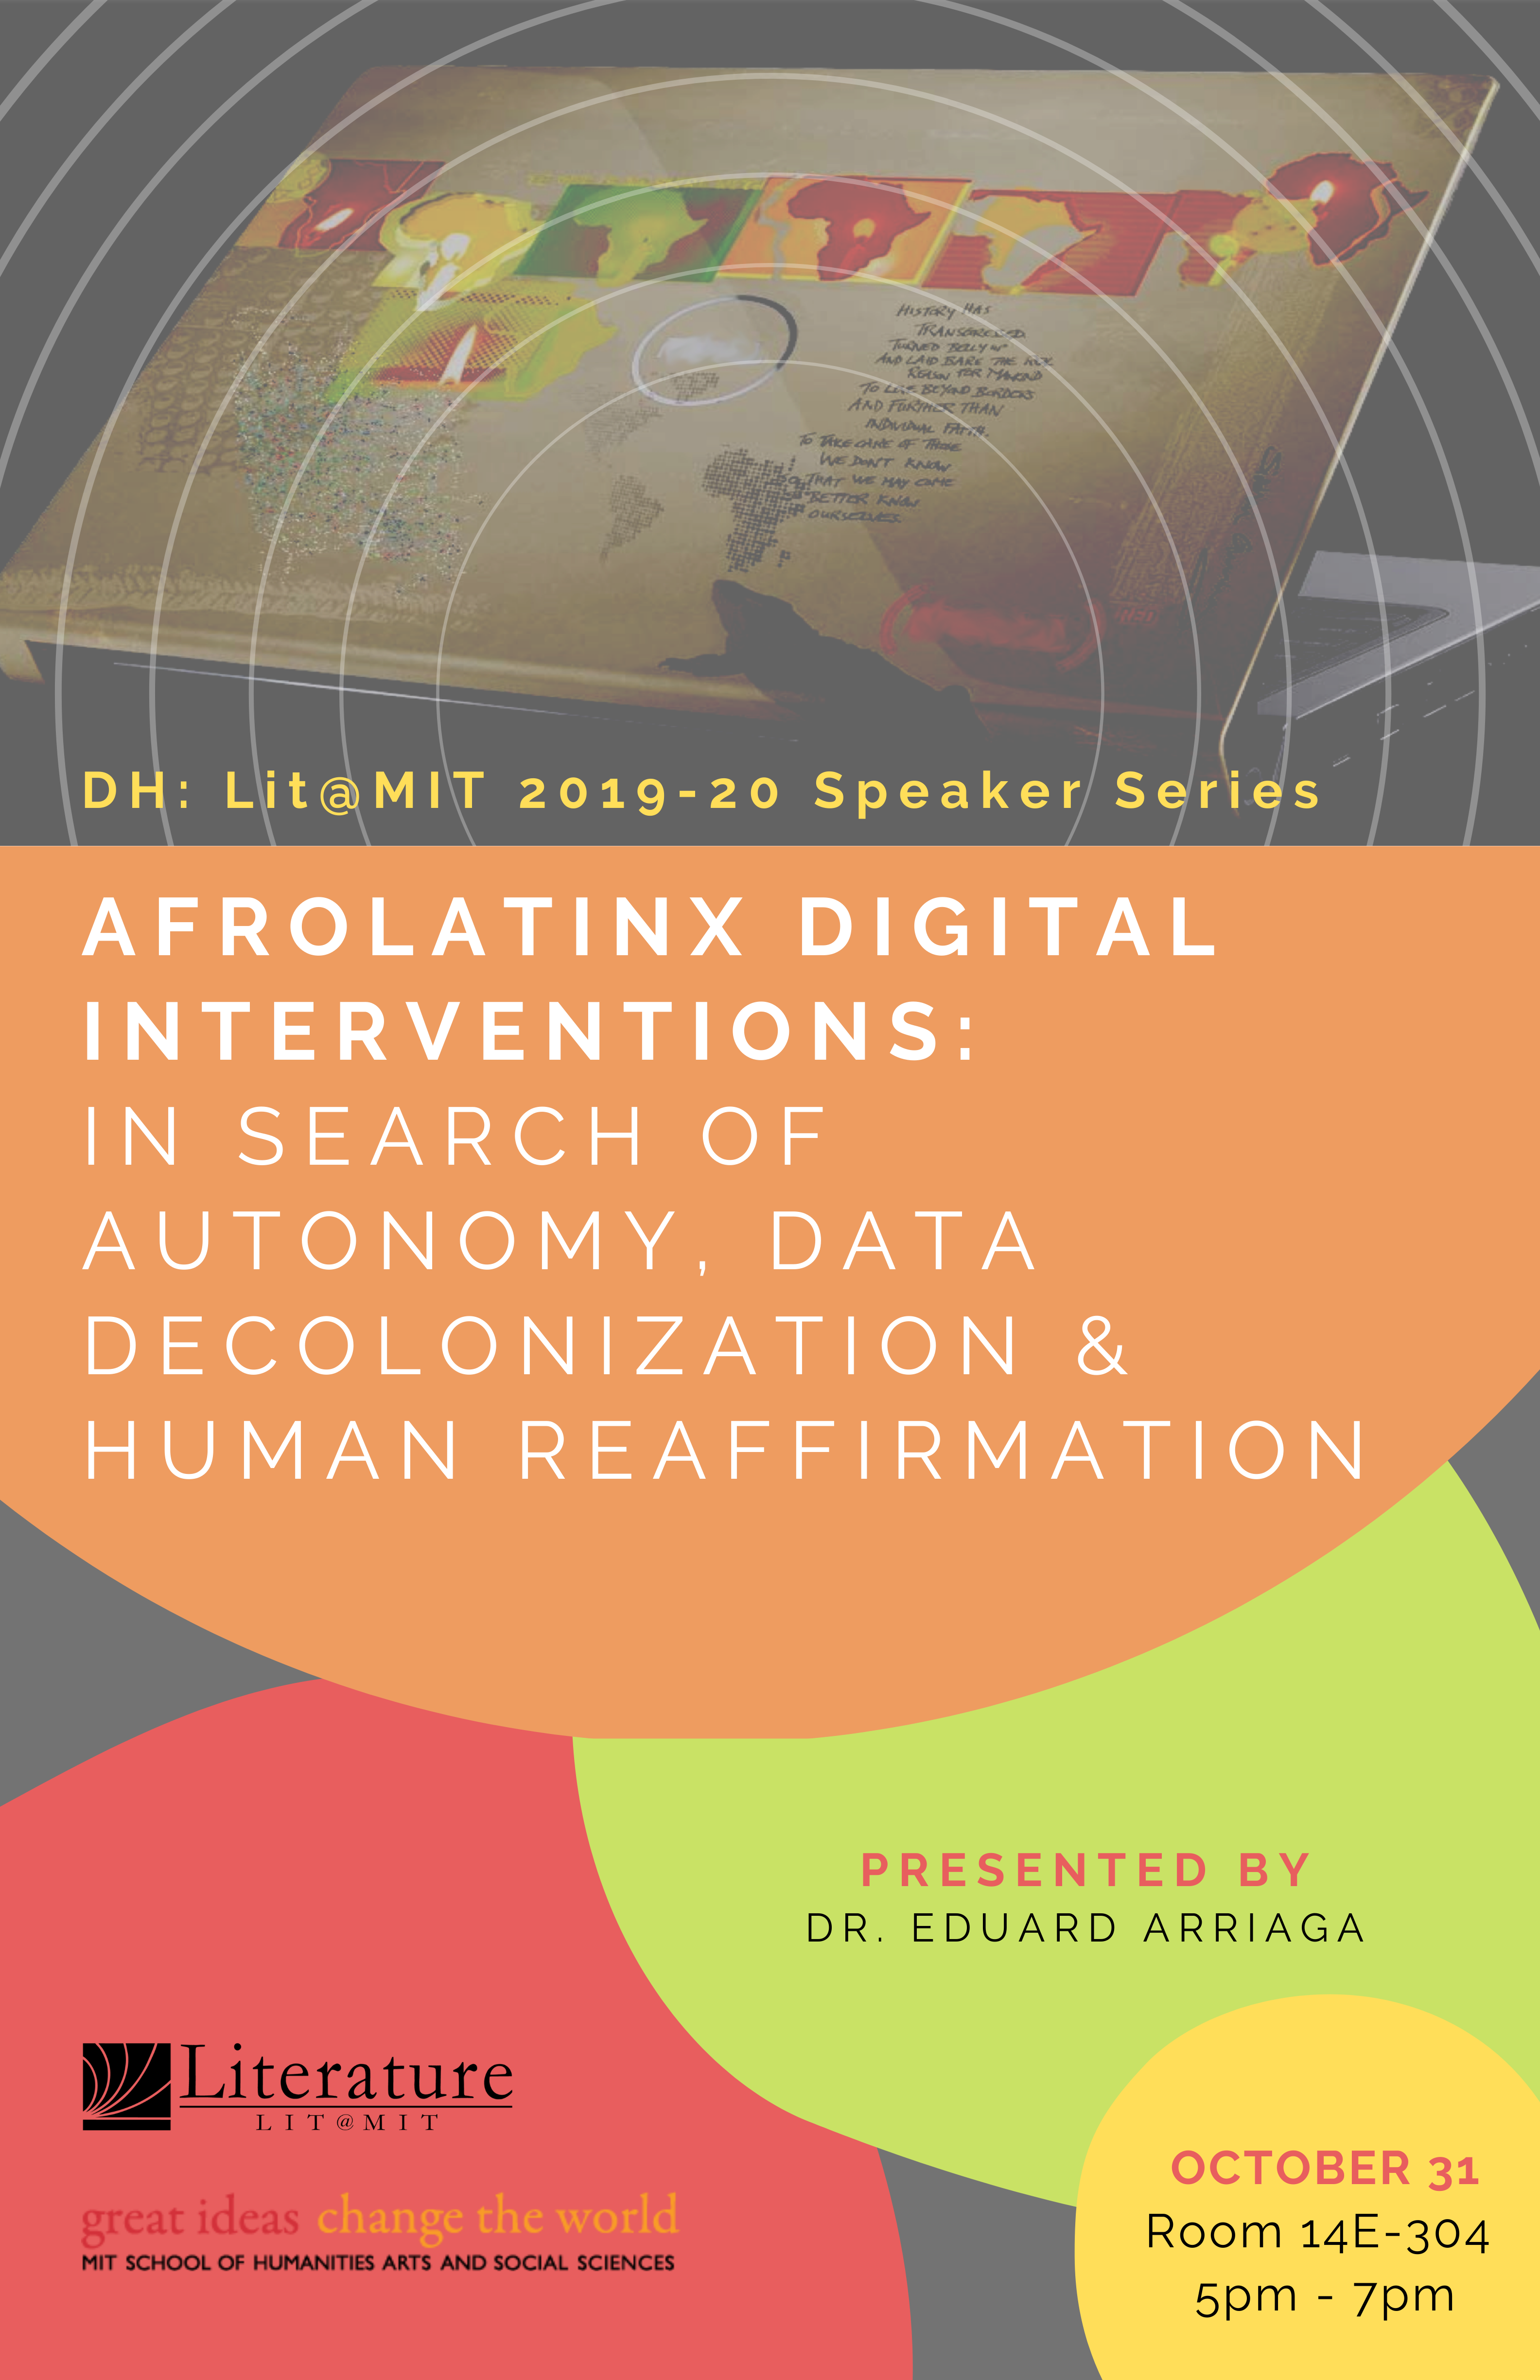 Afrolatinx Digital Interventions: In Search of Autonomy, Data Decolonization and Human Reaffirmation